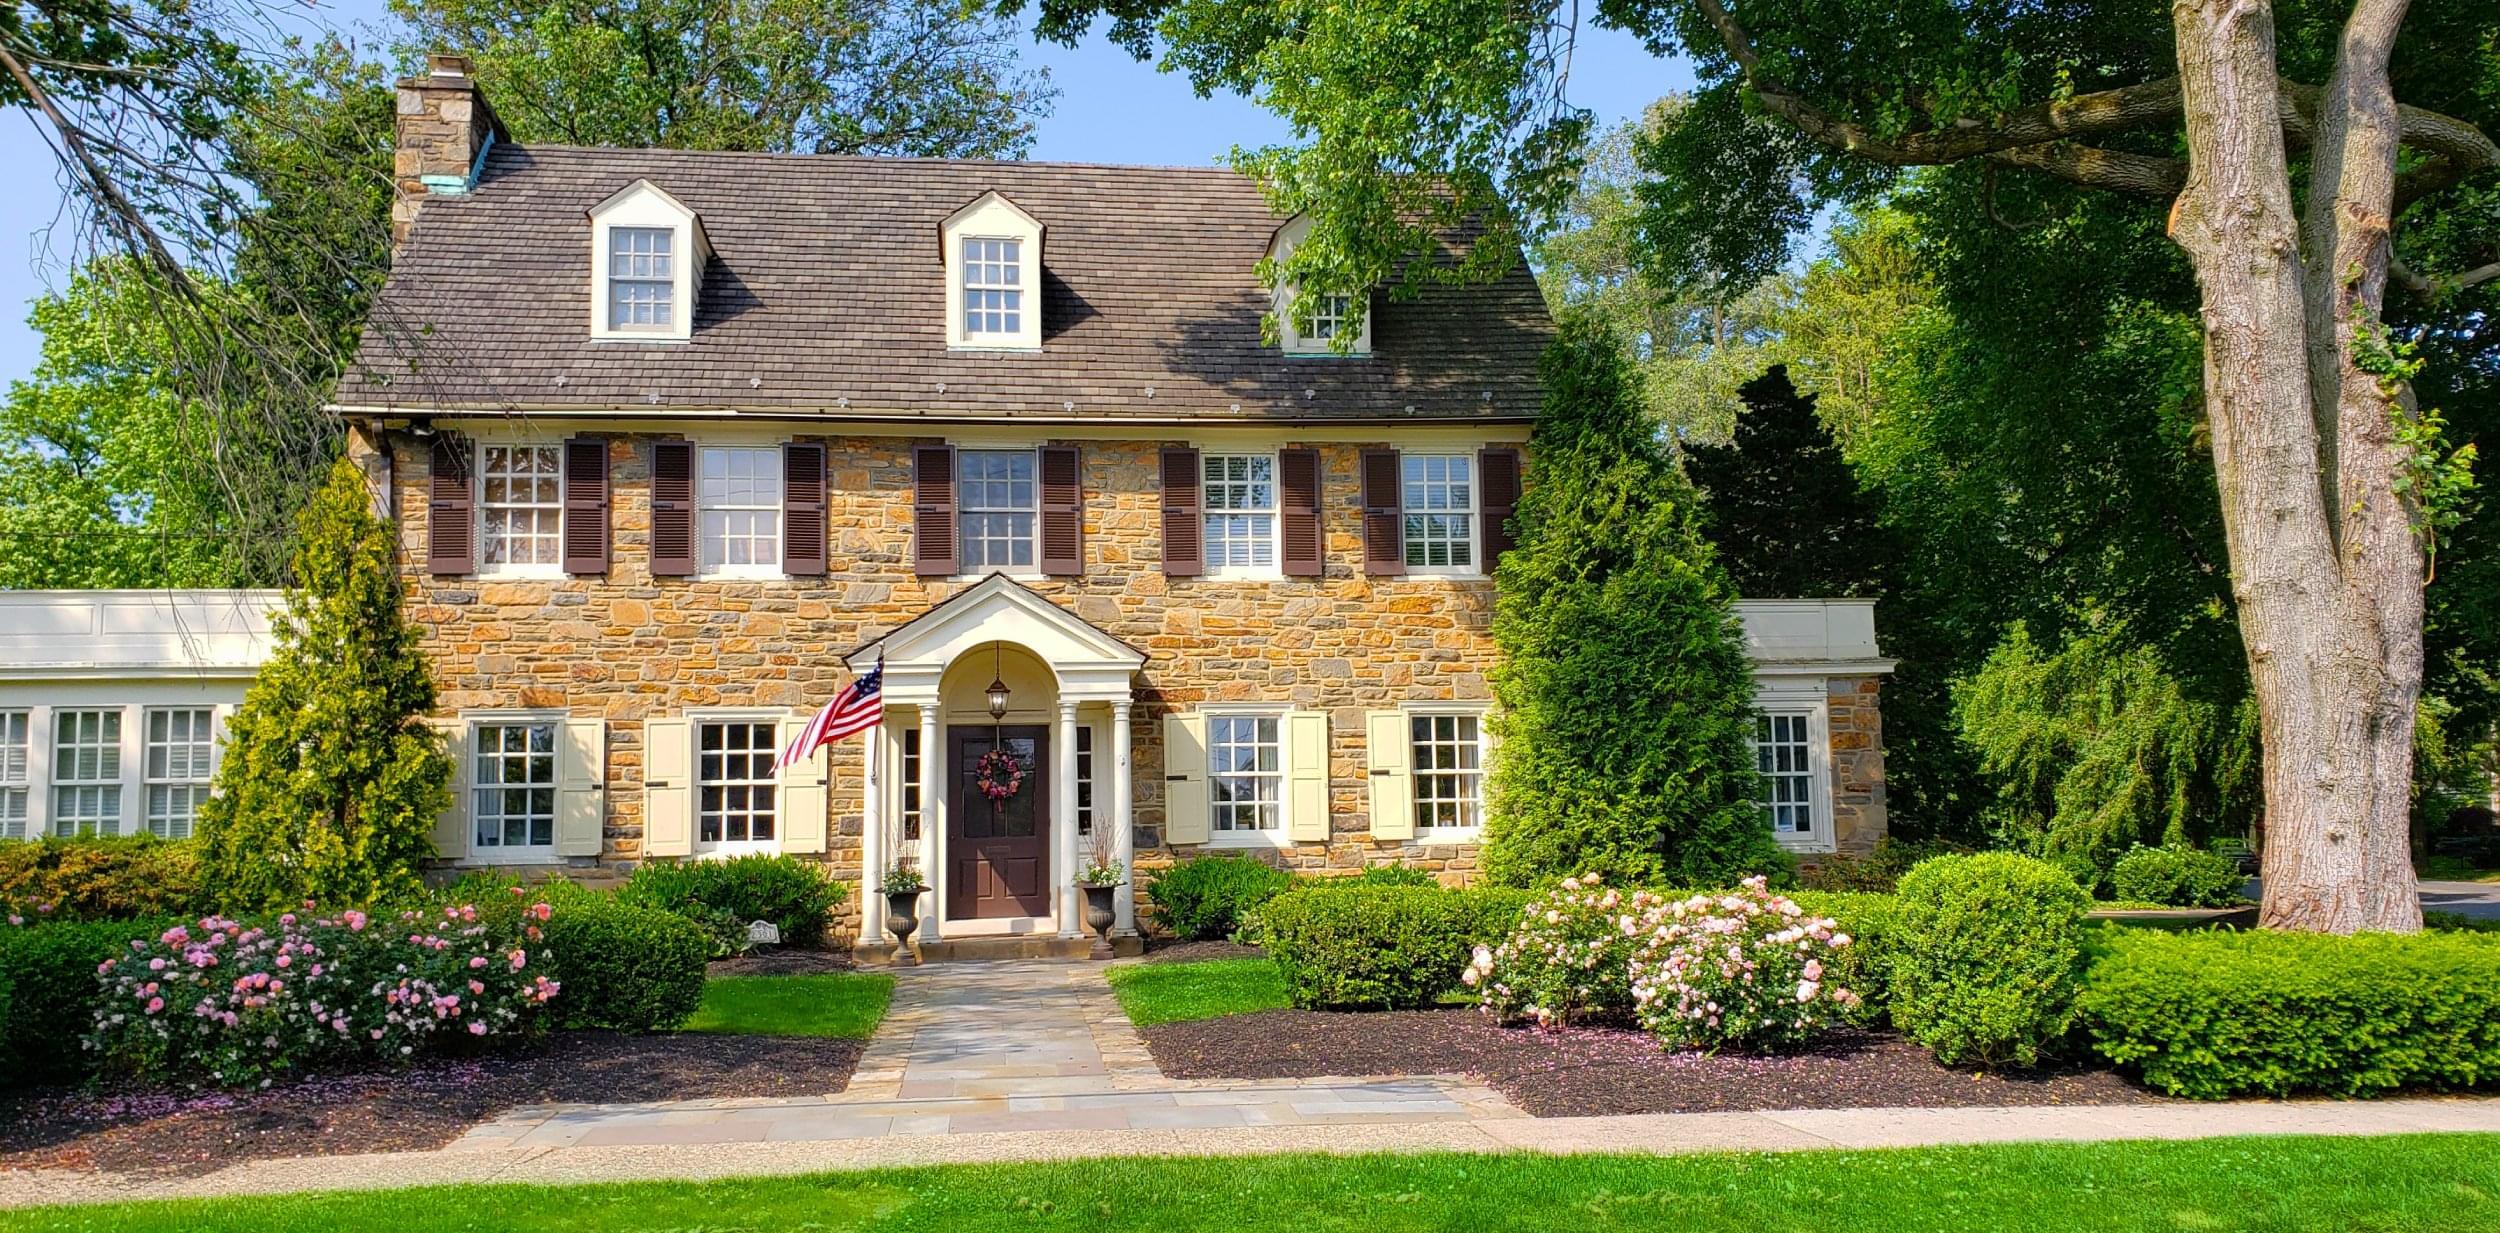 A stone facade house with a well-landscaped front yard